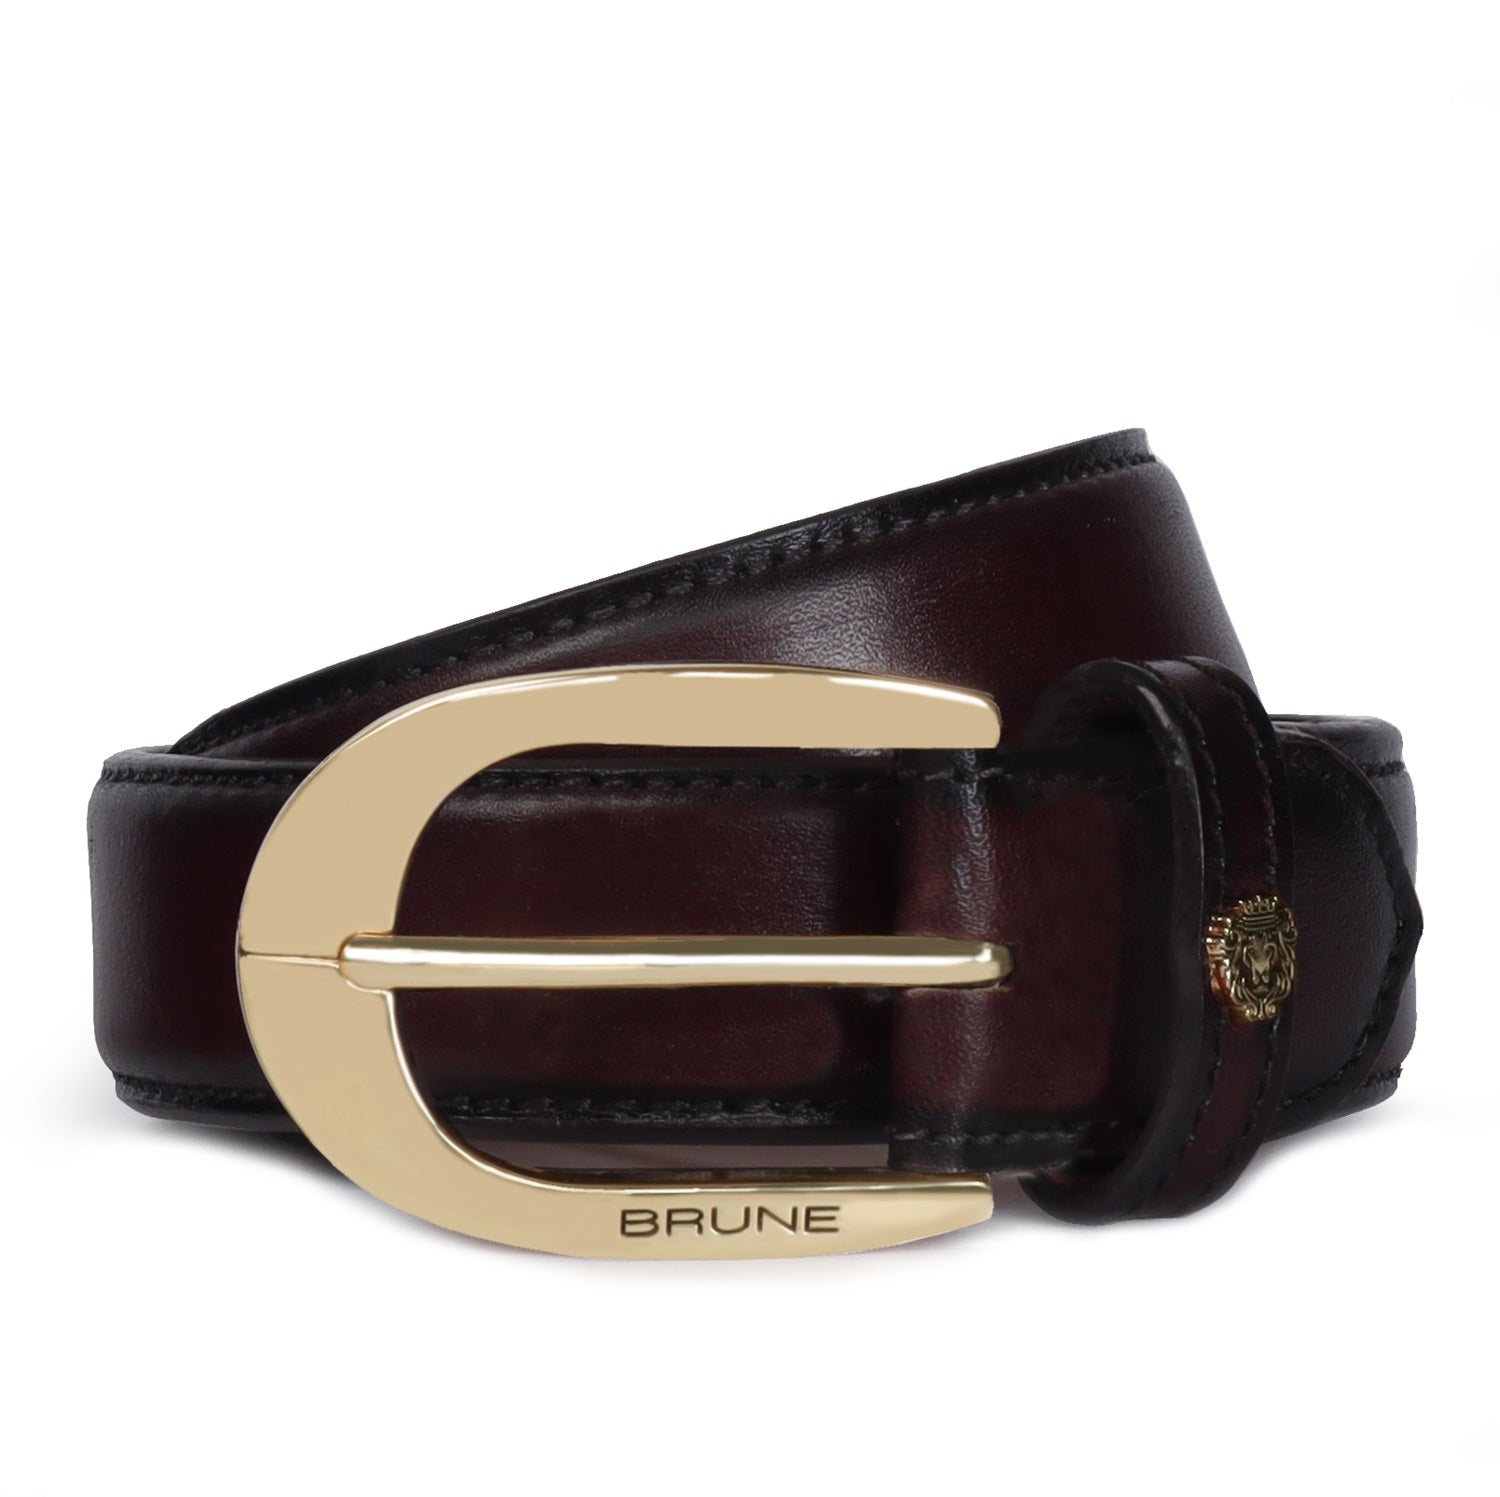 Hand Painted Men's Formal Belt in Dark Brown Leather with Oval Shape Buckle